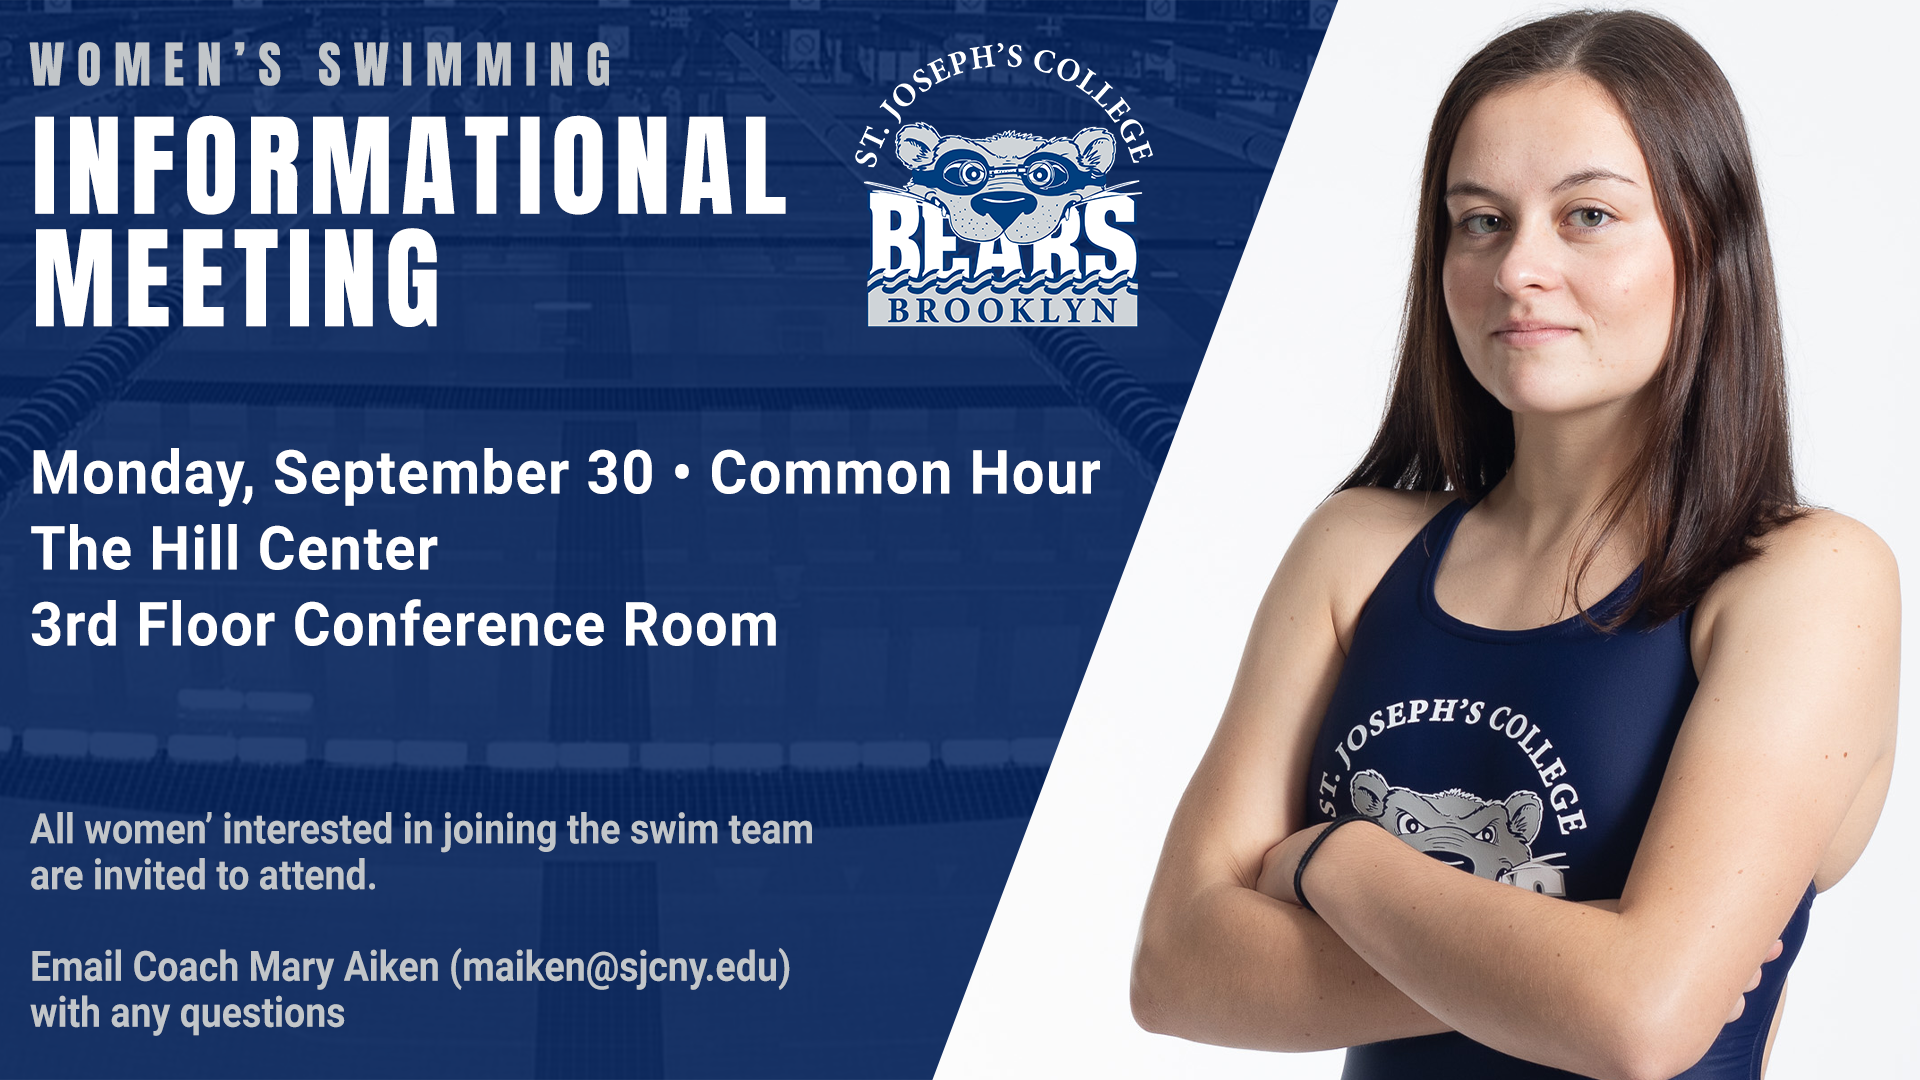 Women's Swimming Hosts Informational Meeting on Monday at Common Hour